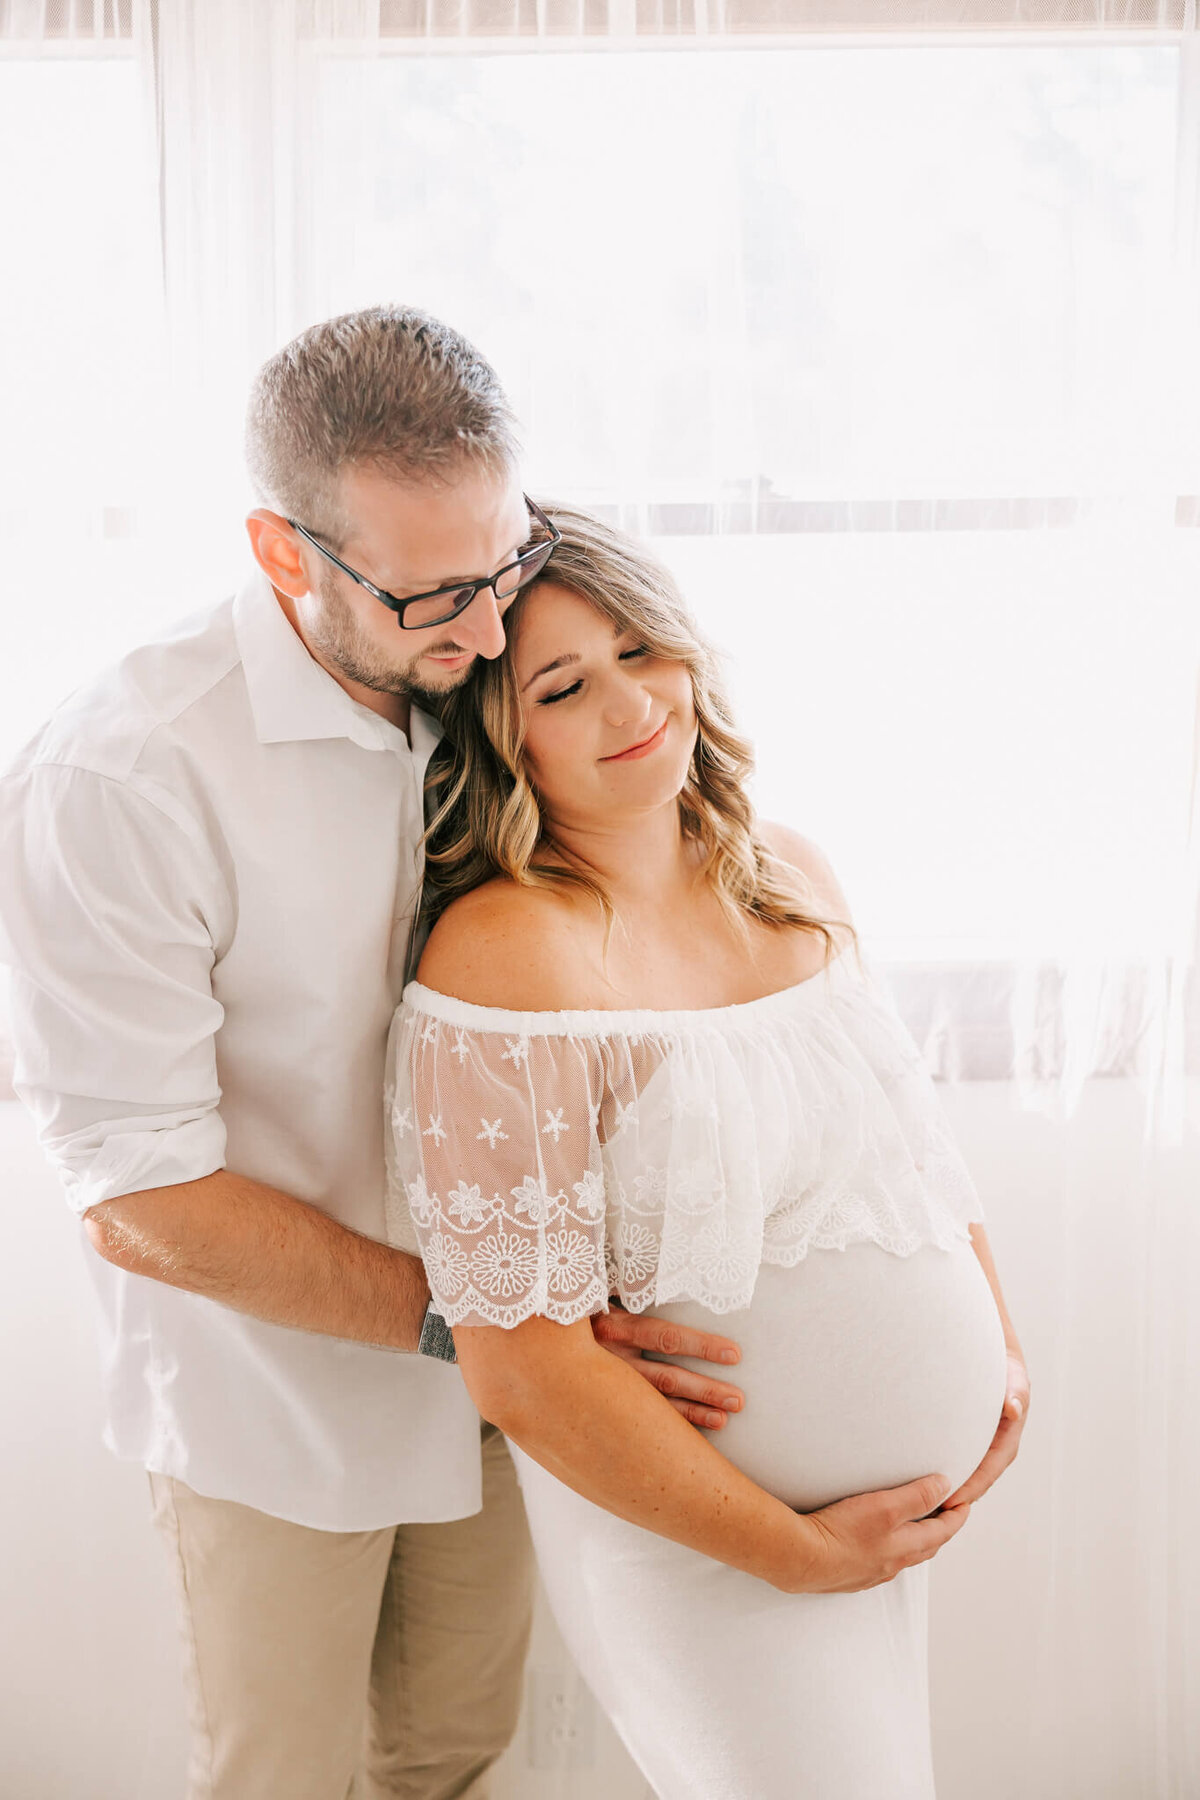 wife is wearing a white dress and leaning on husband  in front of studio window for her maternity session portraits in portland oregon.